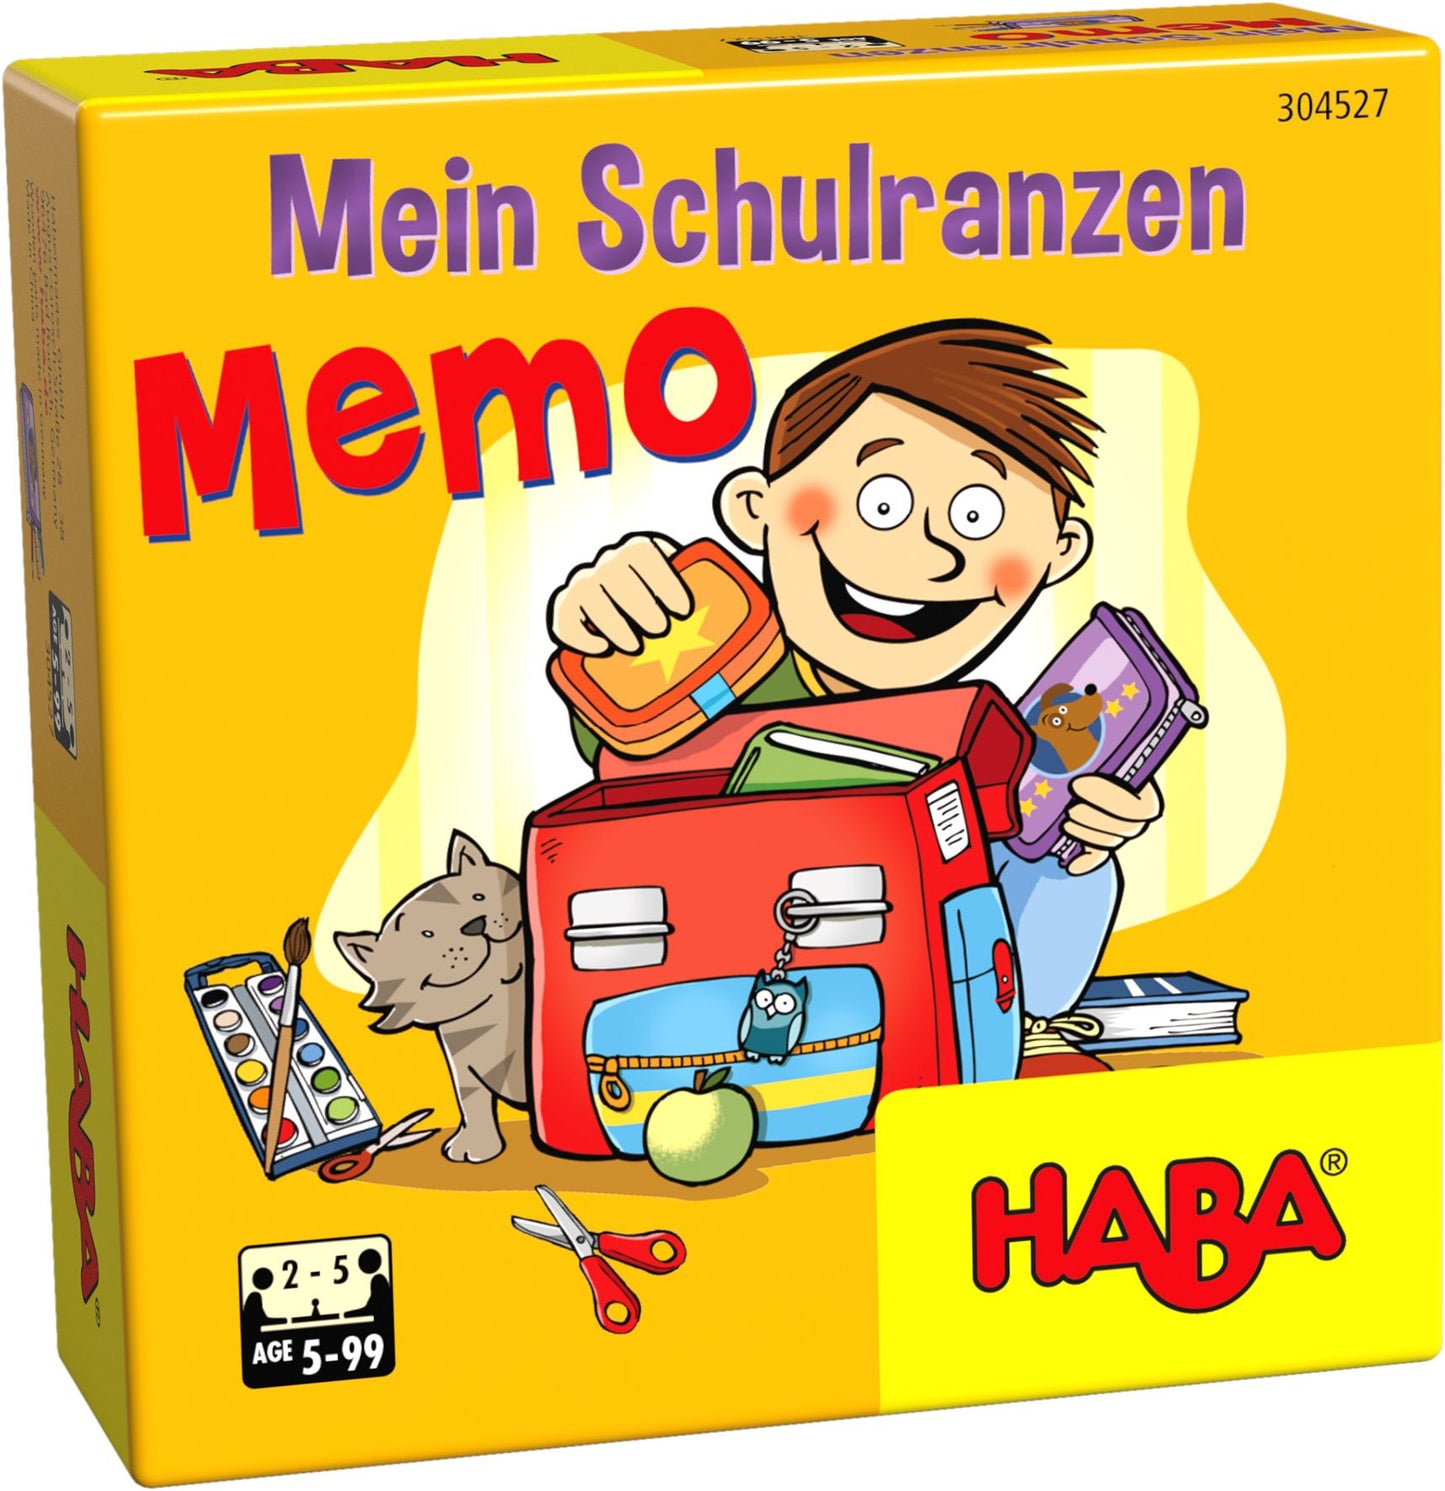 My Backpack Memory Game - Mein Schulranzen Memo - Ozzie Collectables